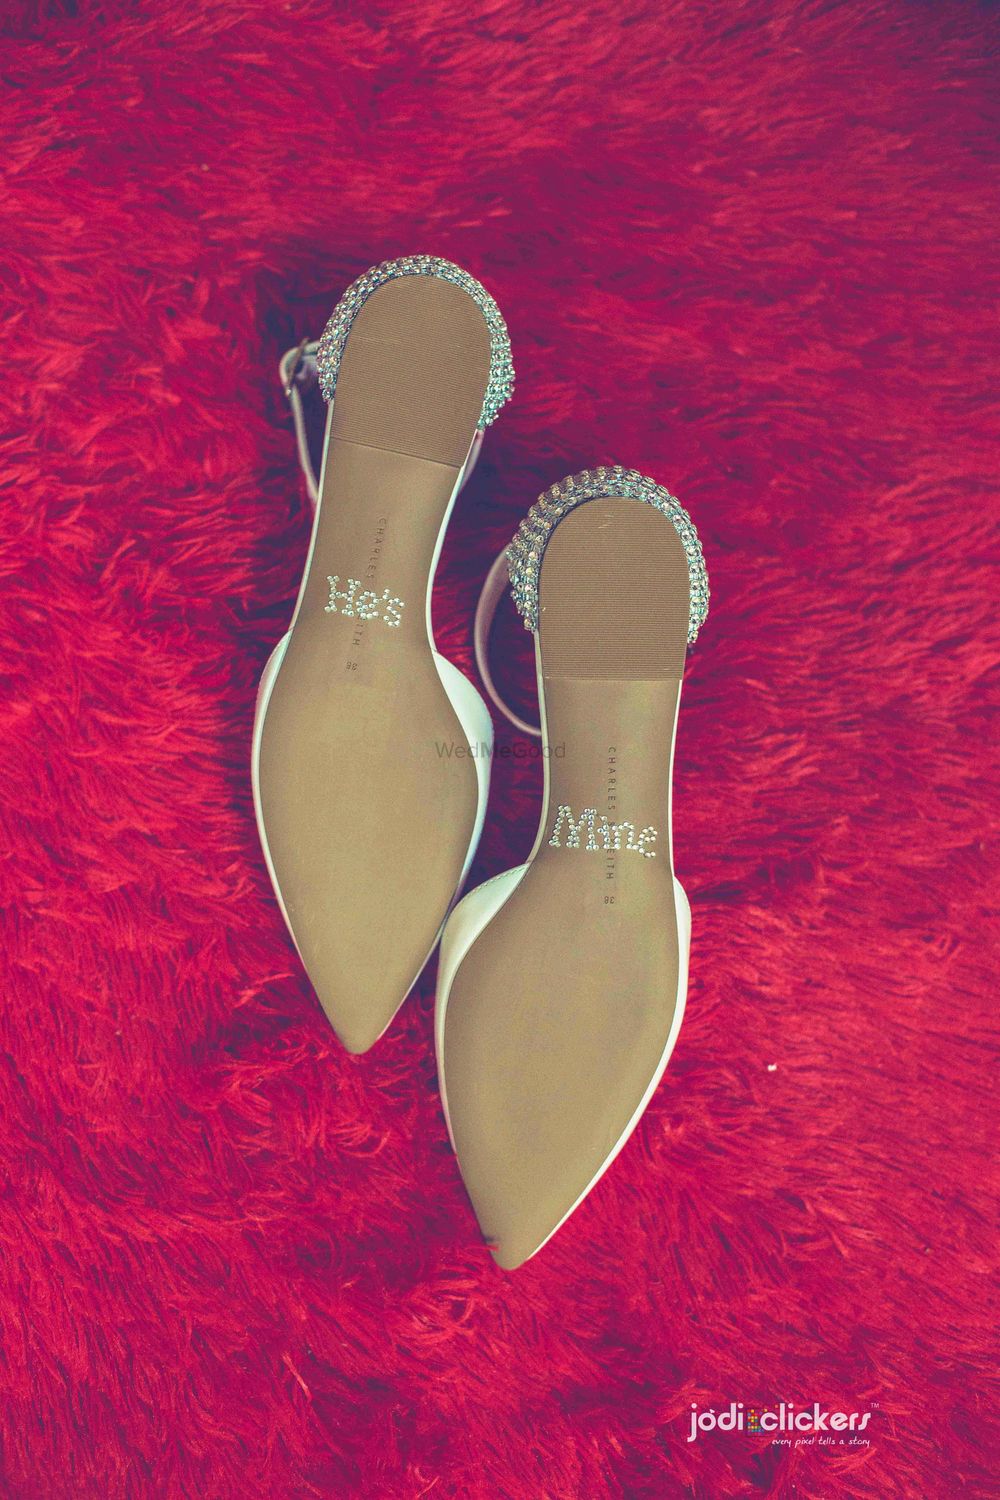 Photo of Bridal shoes with something written on the sole